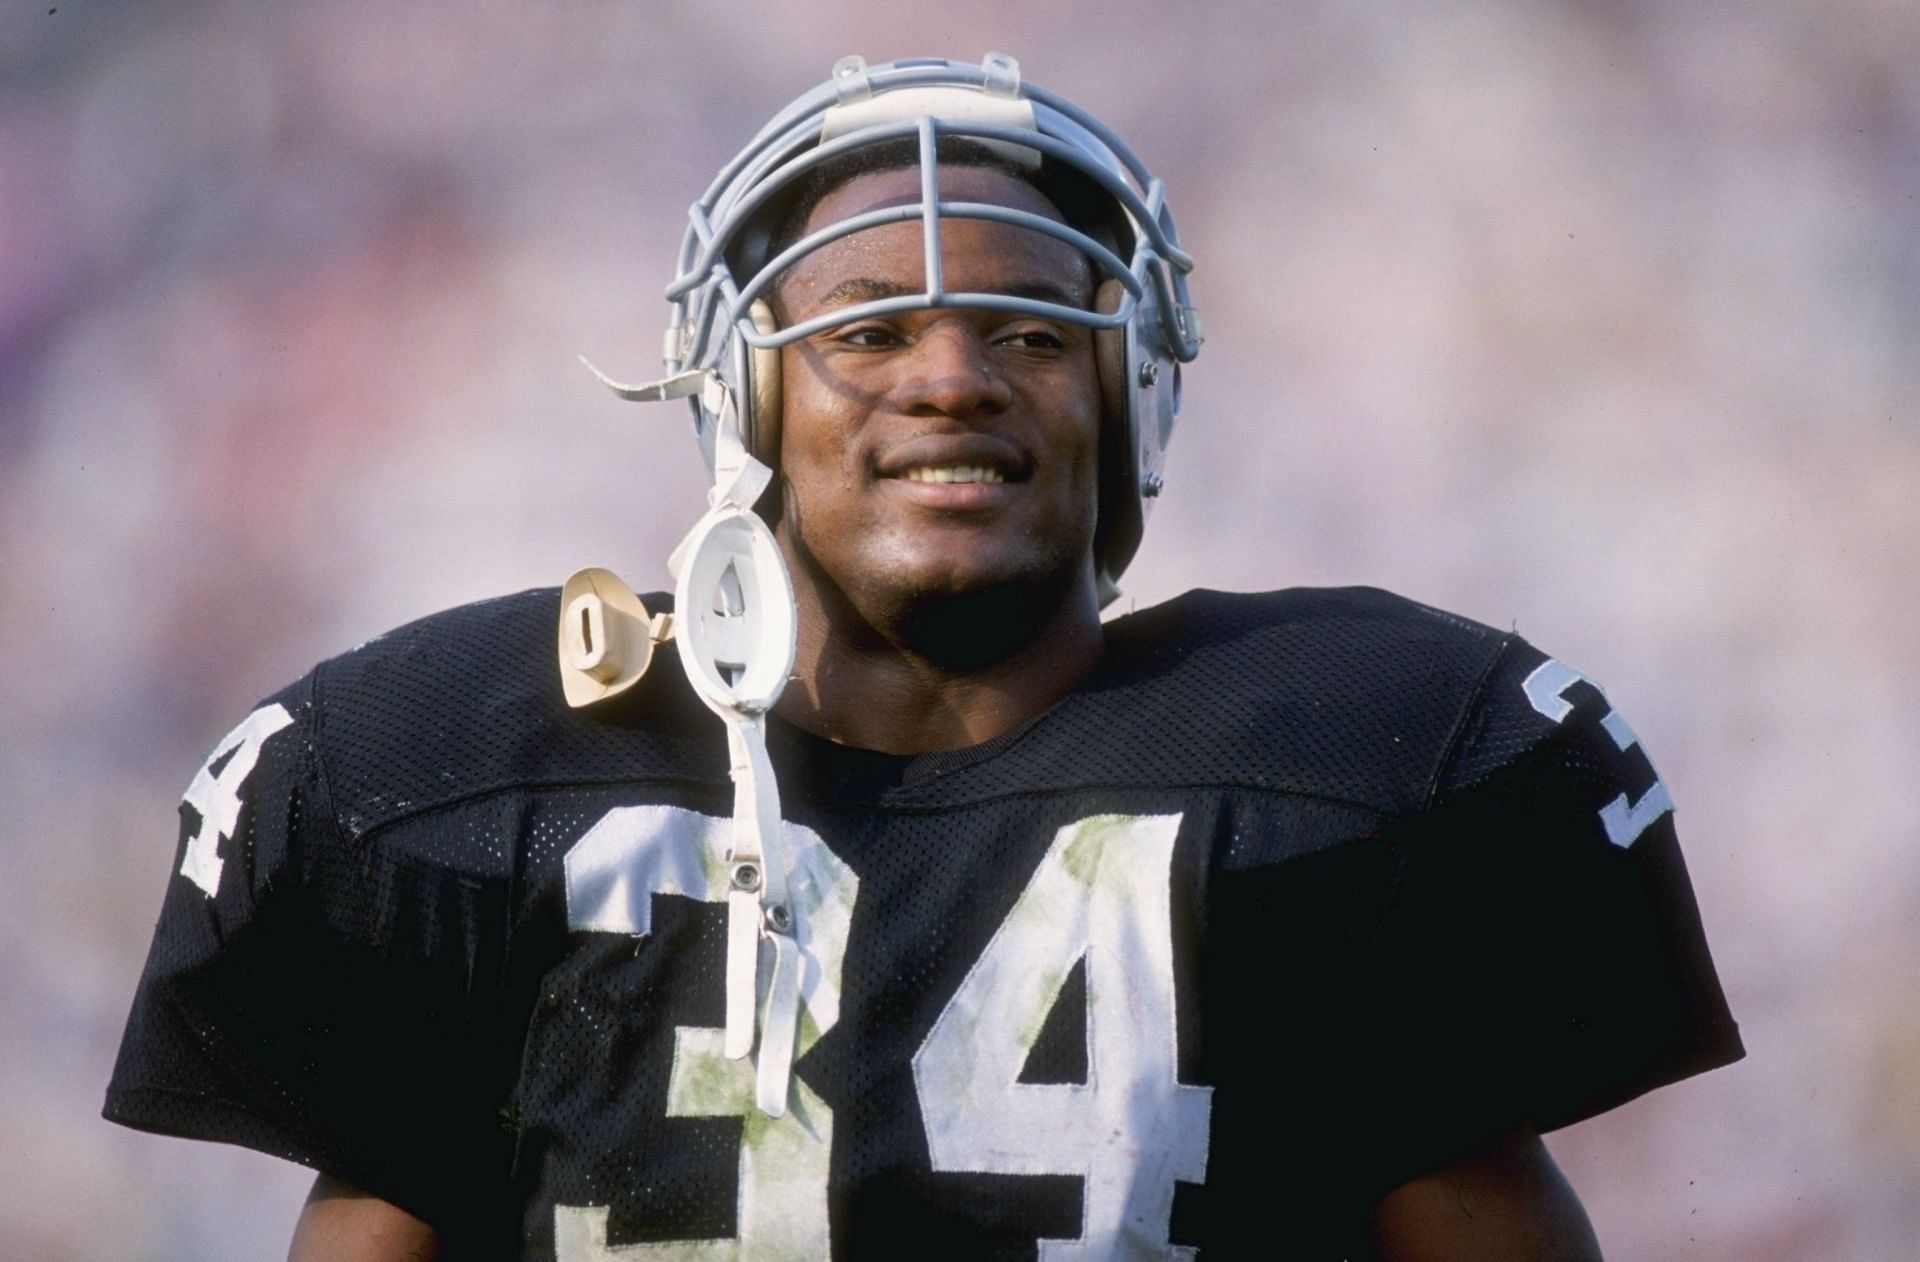 The running back with the Los Angeles Raiders